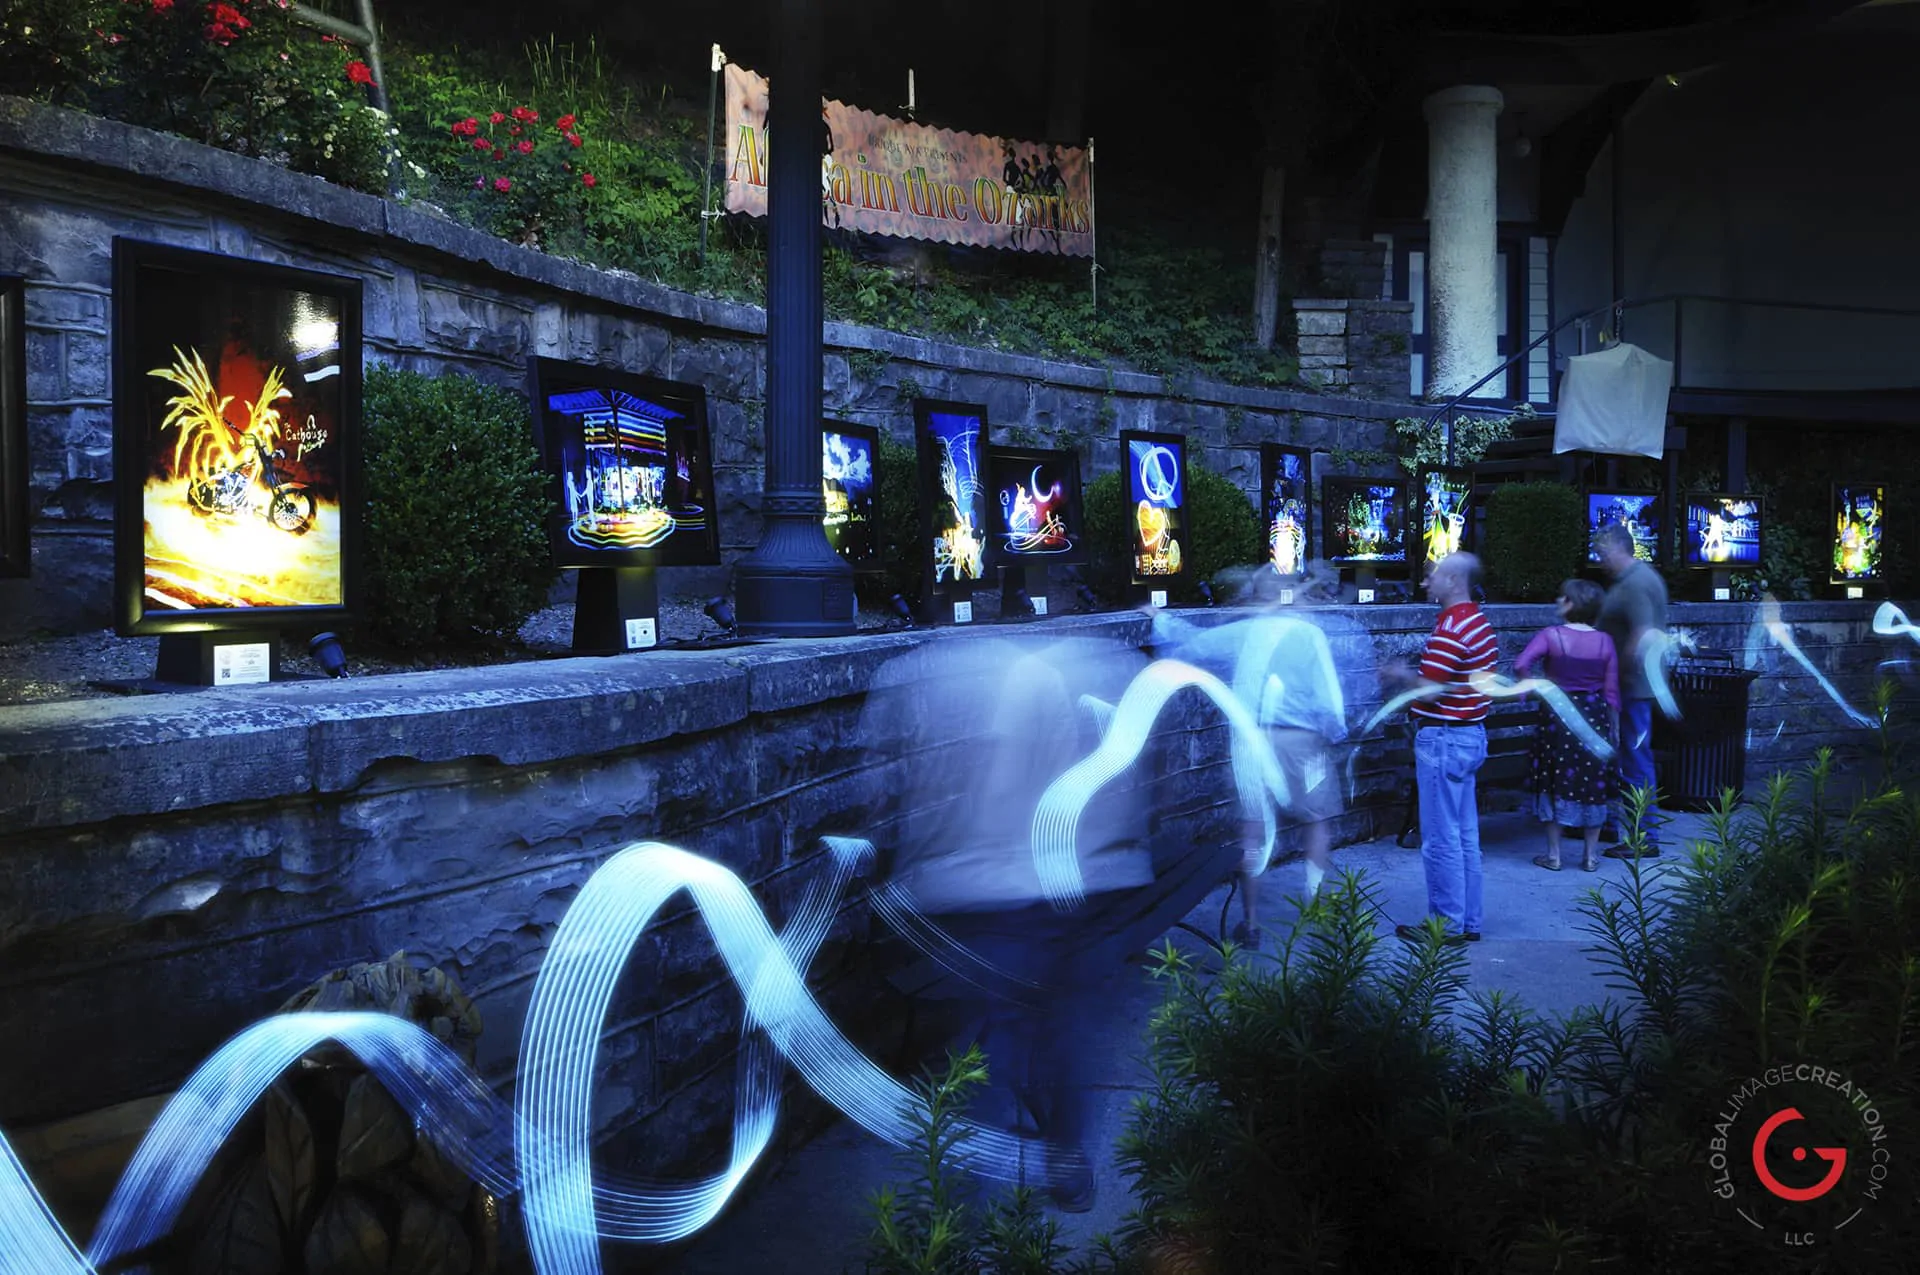 Light Painting Photography from Public Art Project Electric Vision - Eureka Springs, Arkansas